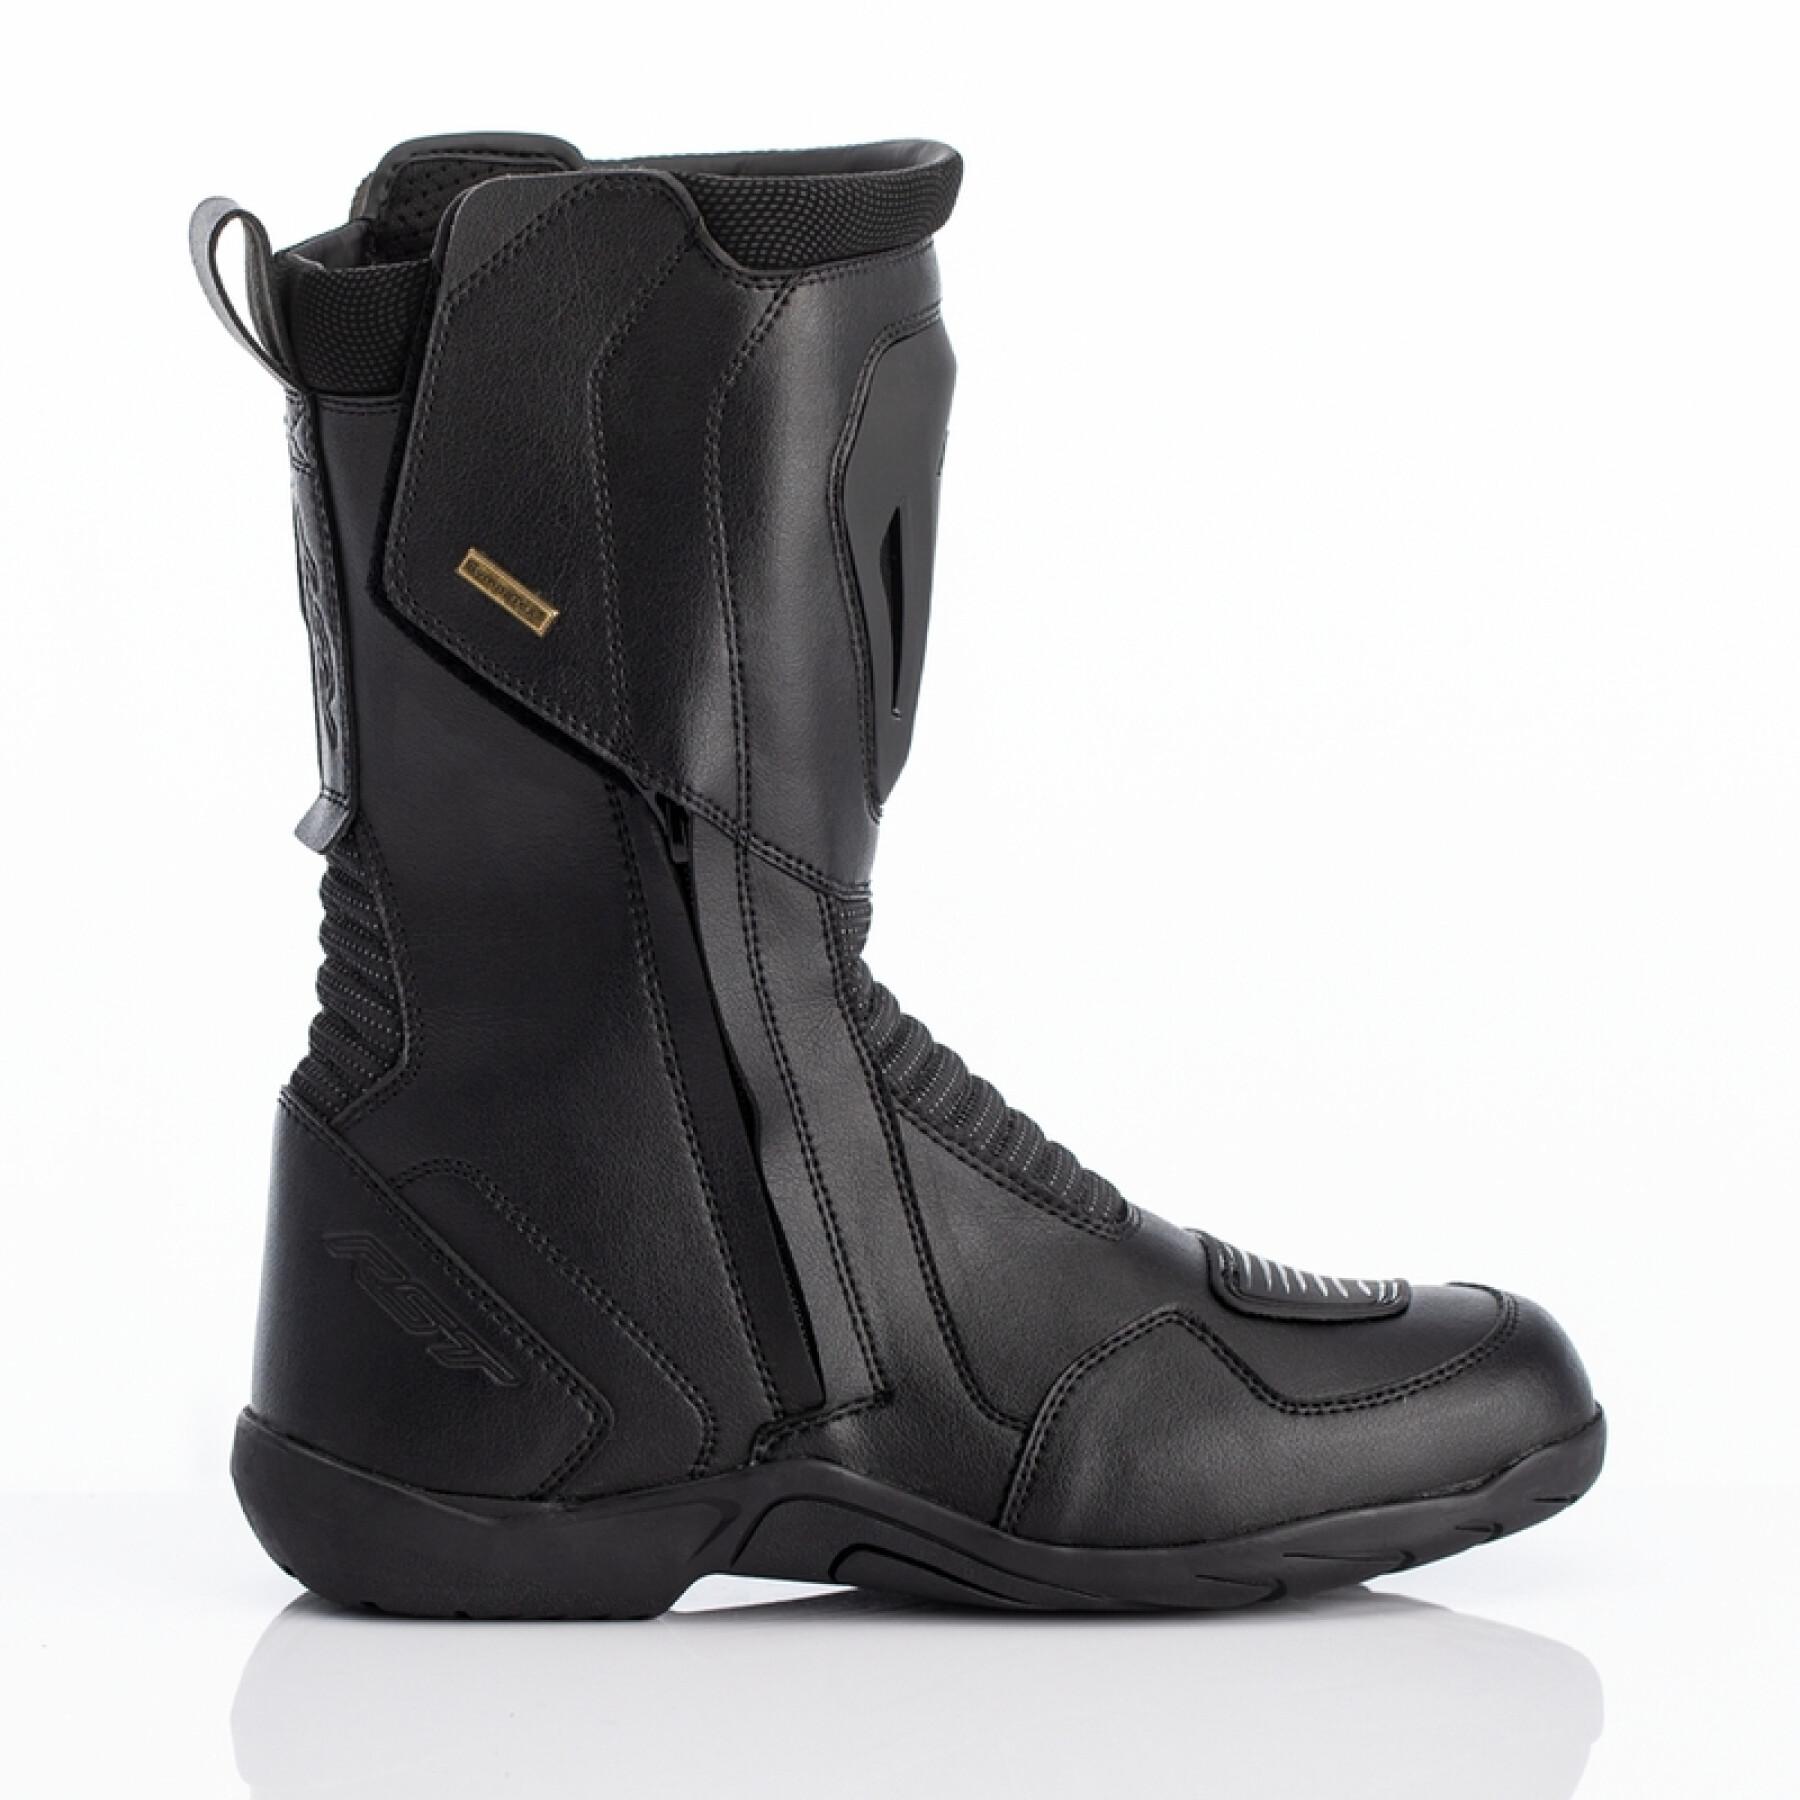 Motorcycle boots RST Pathfinder